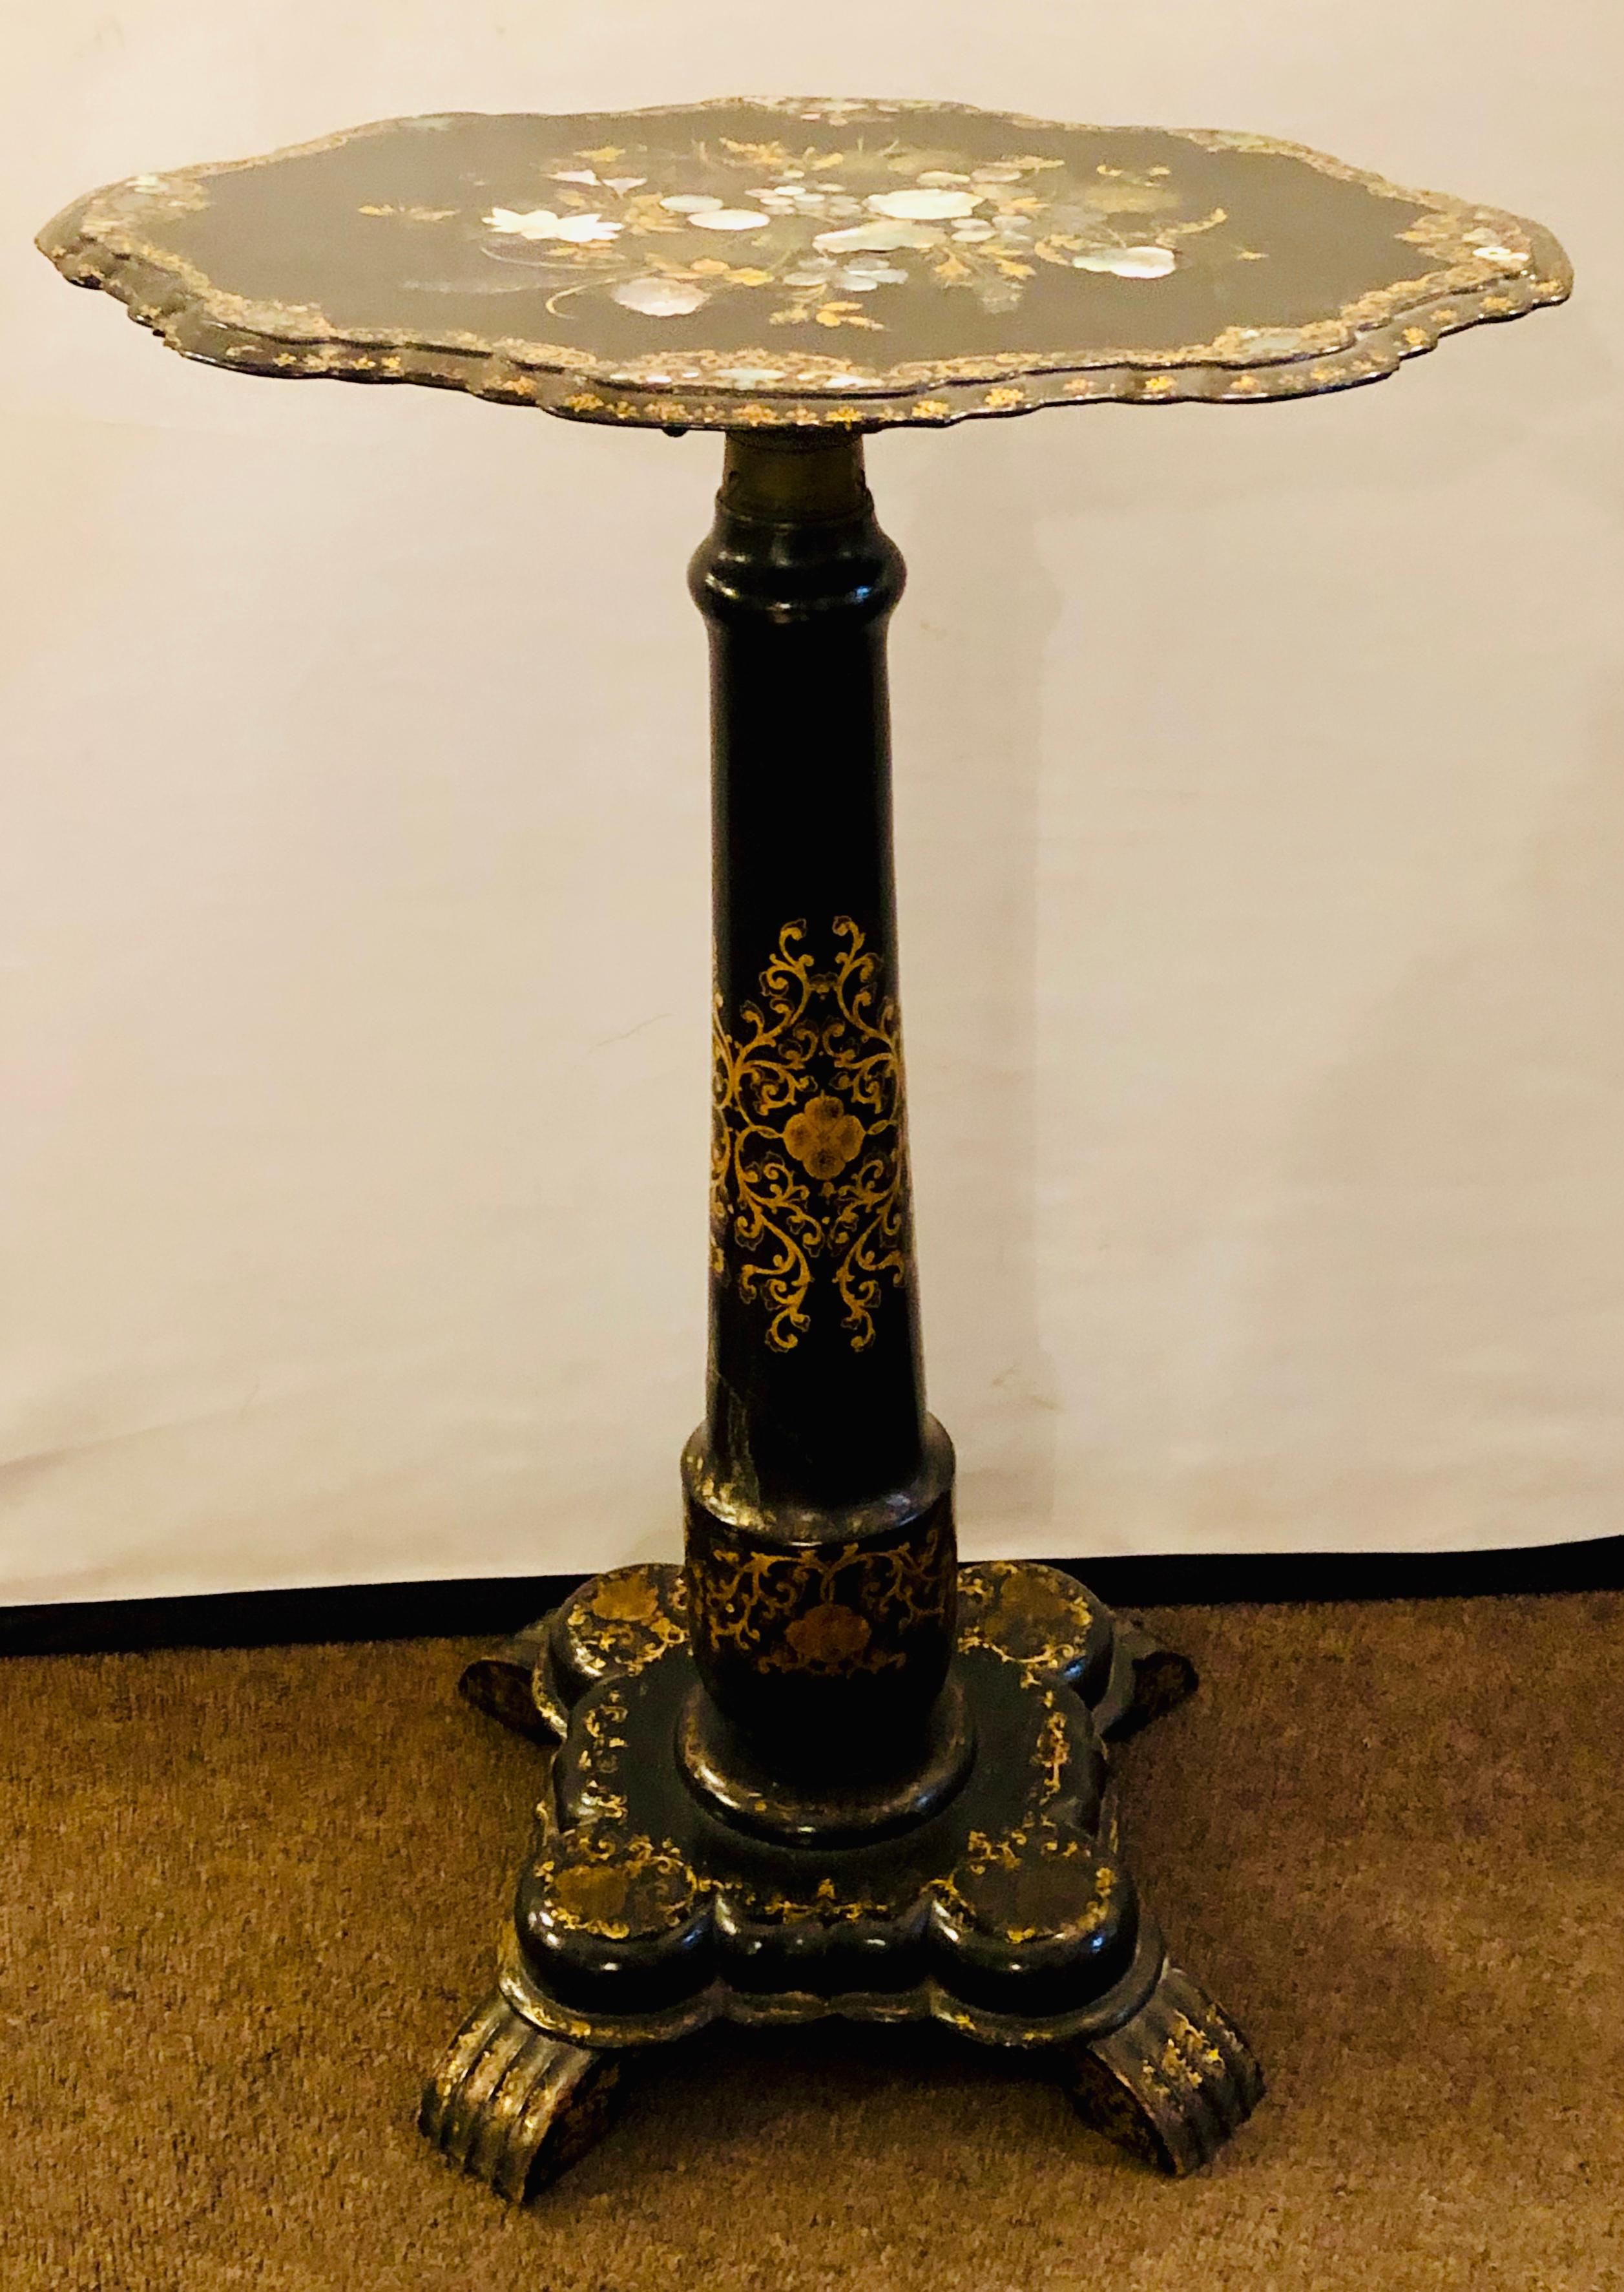 Victorian mother of pearl inlaid 19th century tilt-top candle stand / tea table


IZS Lia.